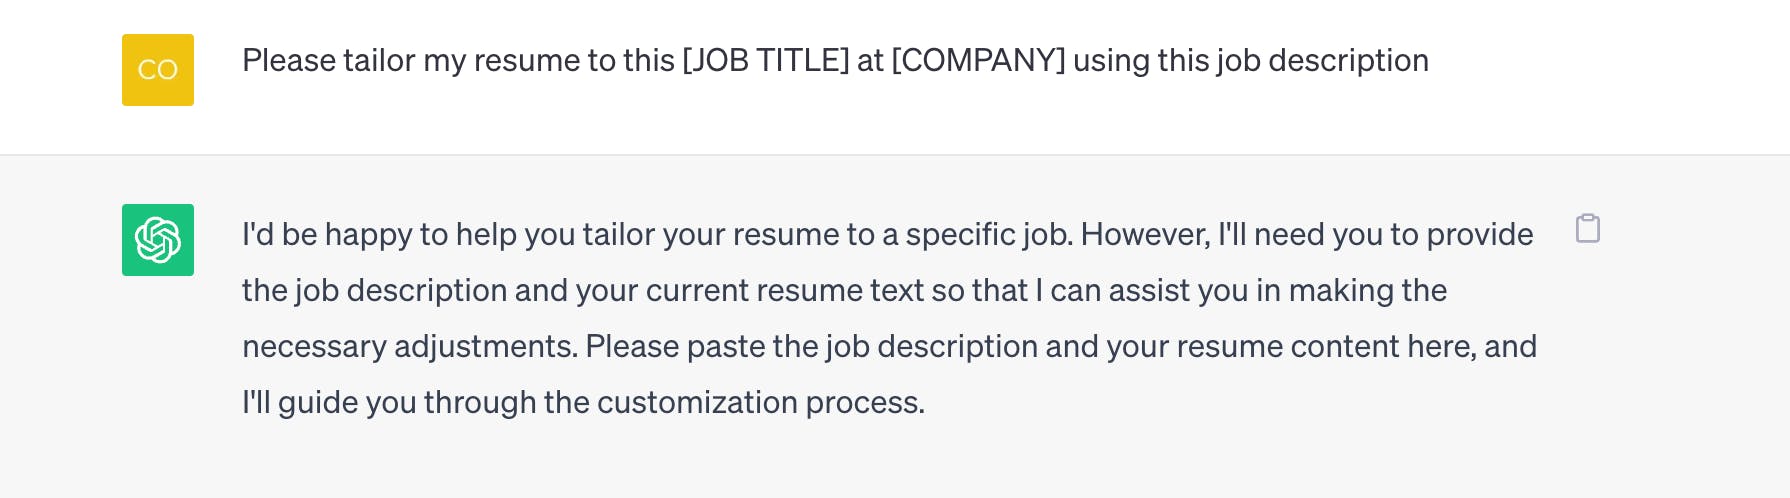 ChatGPT prompt for tailoring a resume